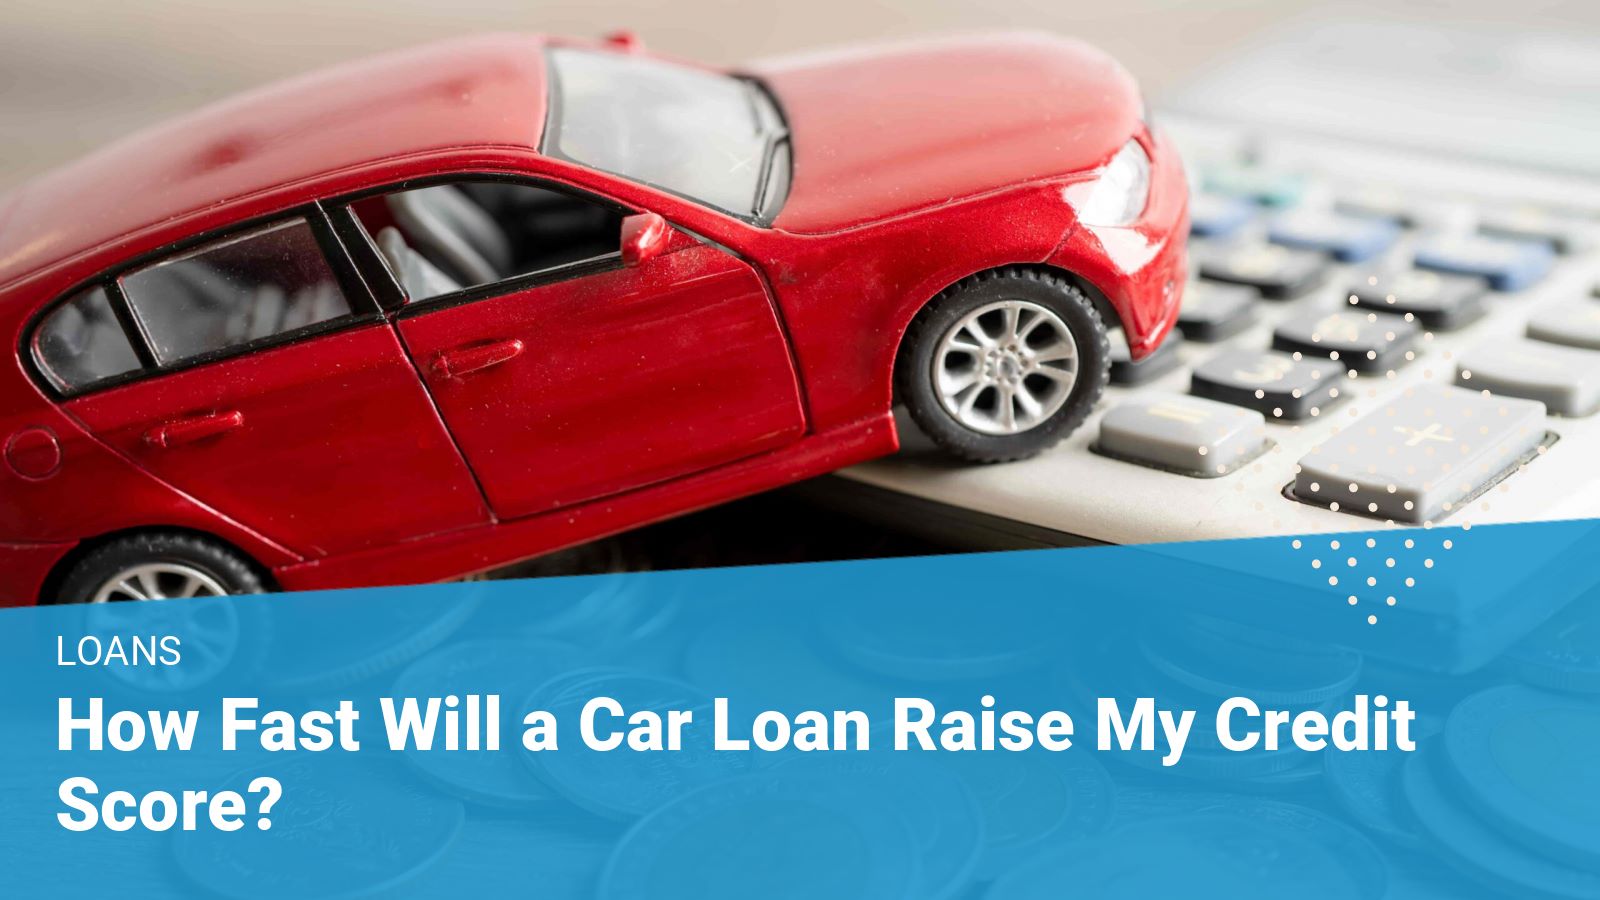 How Much Will A Car Loan Raise My Credit Score